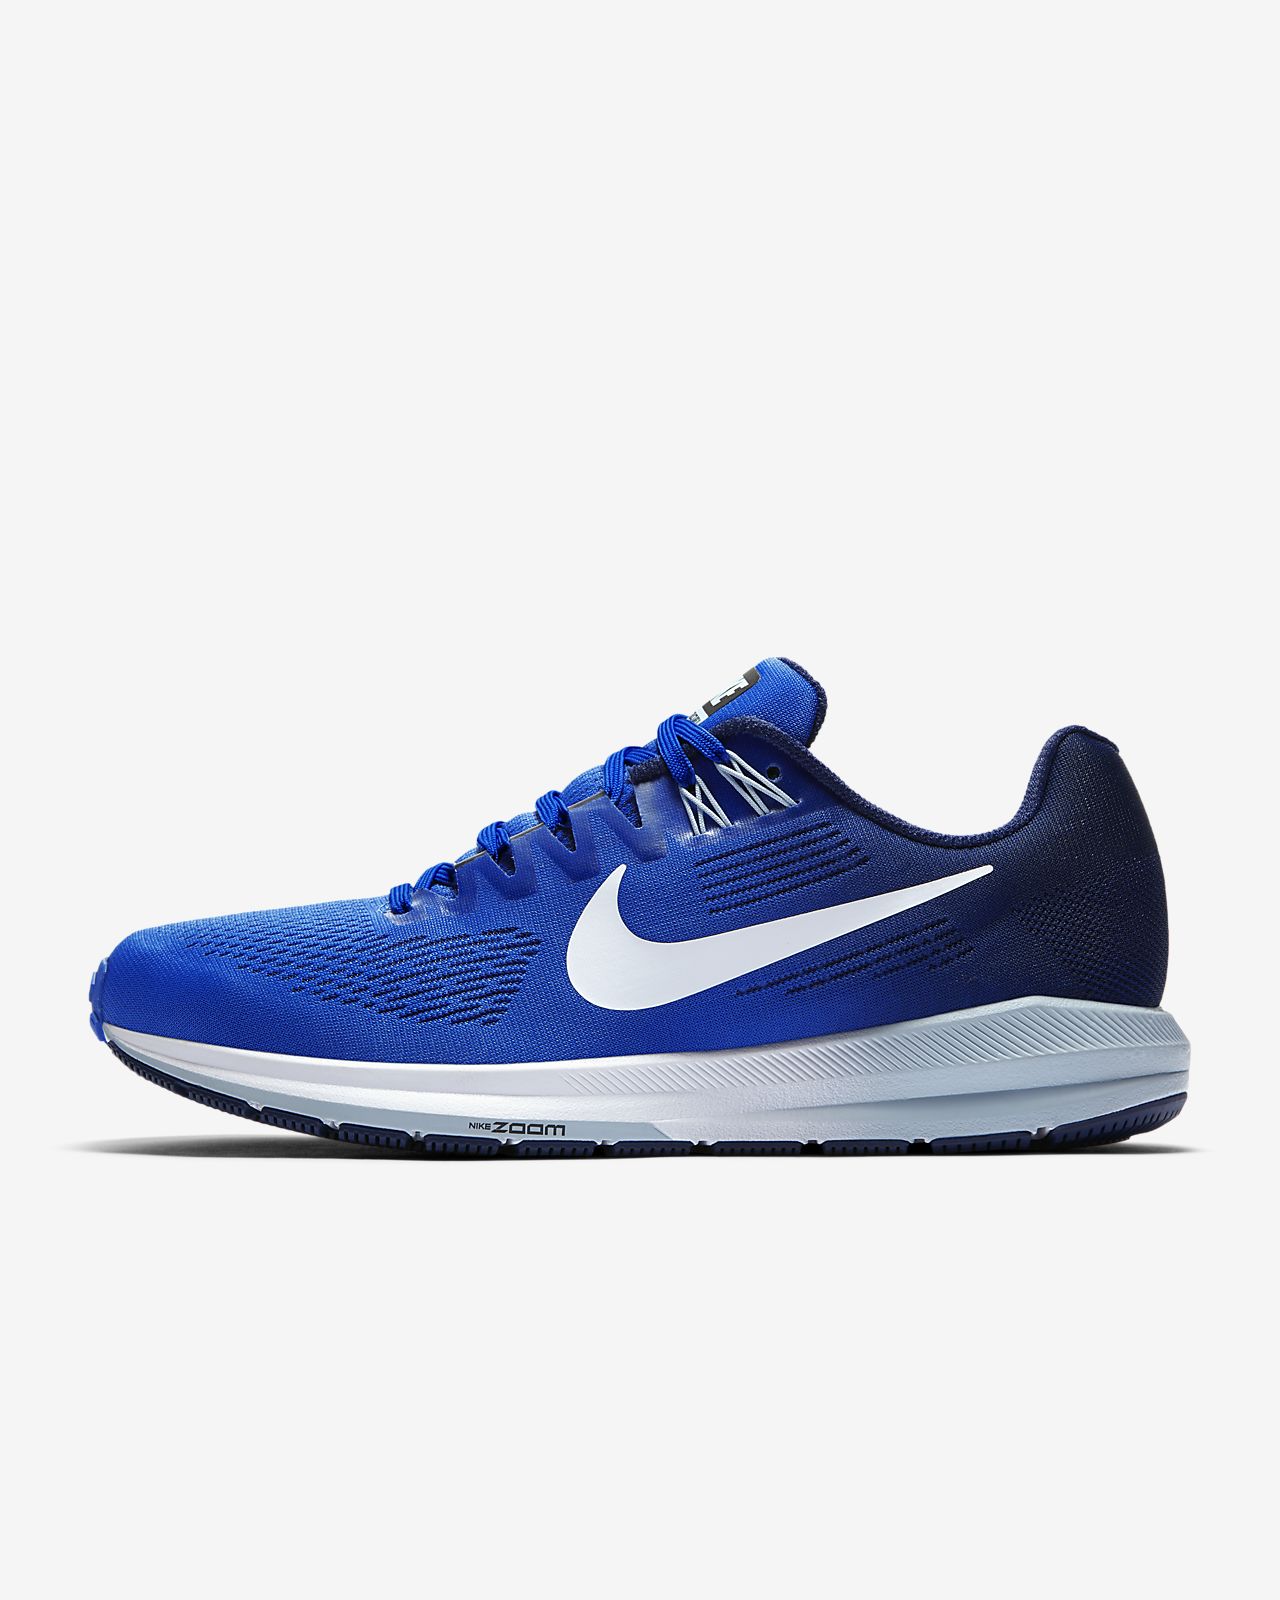 Purchase > nike zoom bleu, Up to 78% OFF